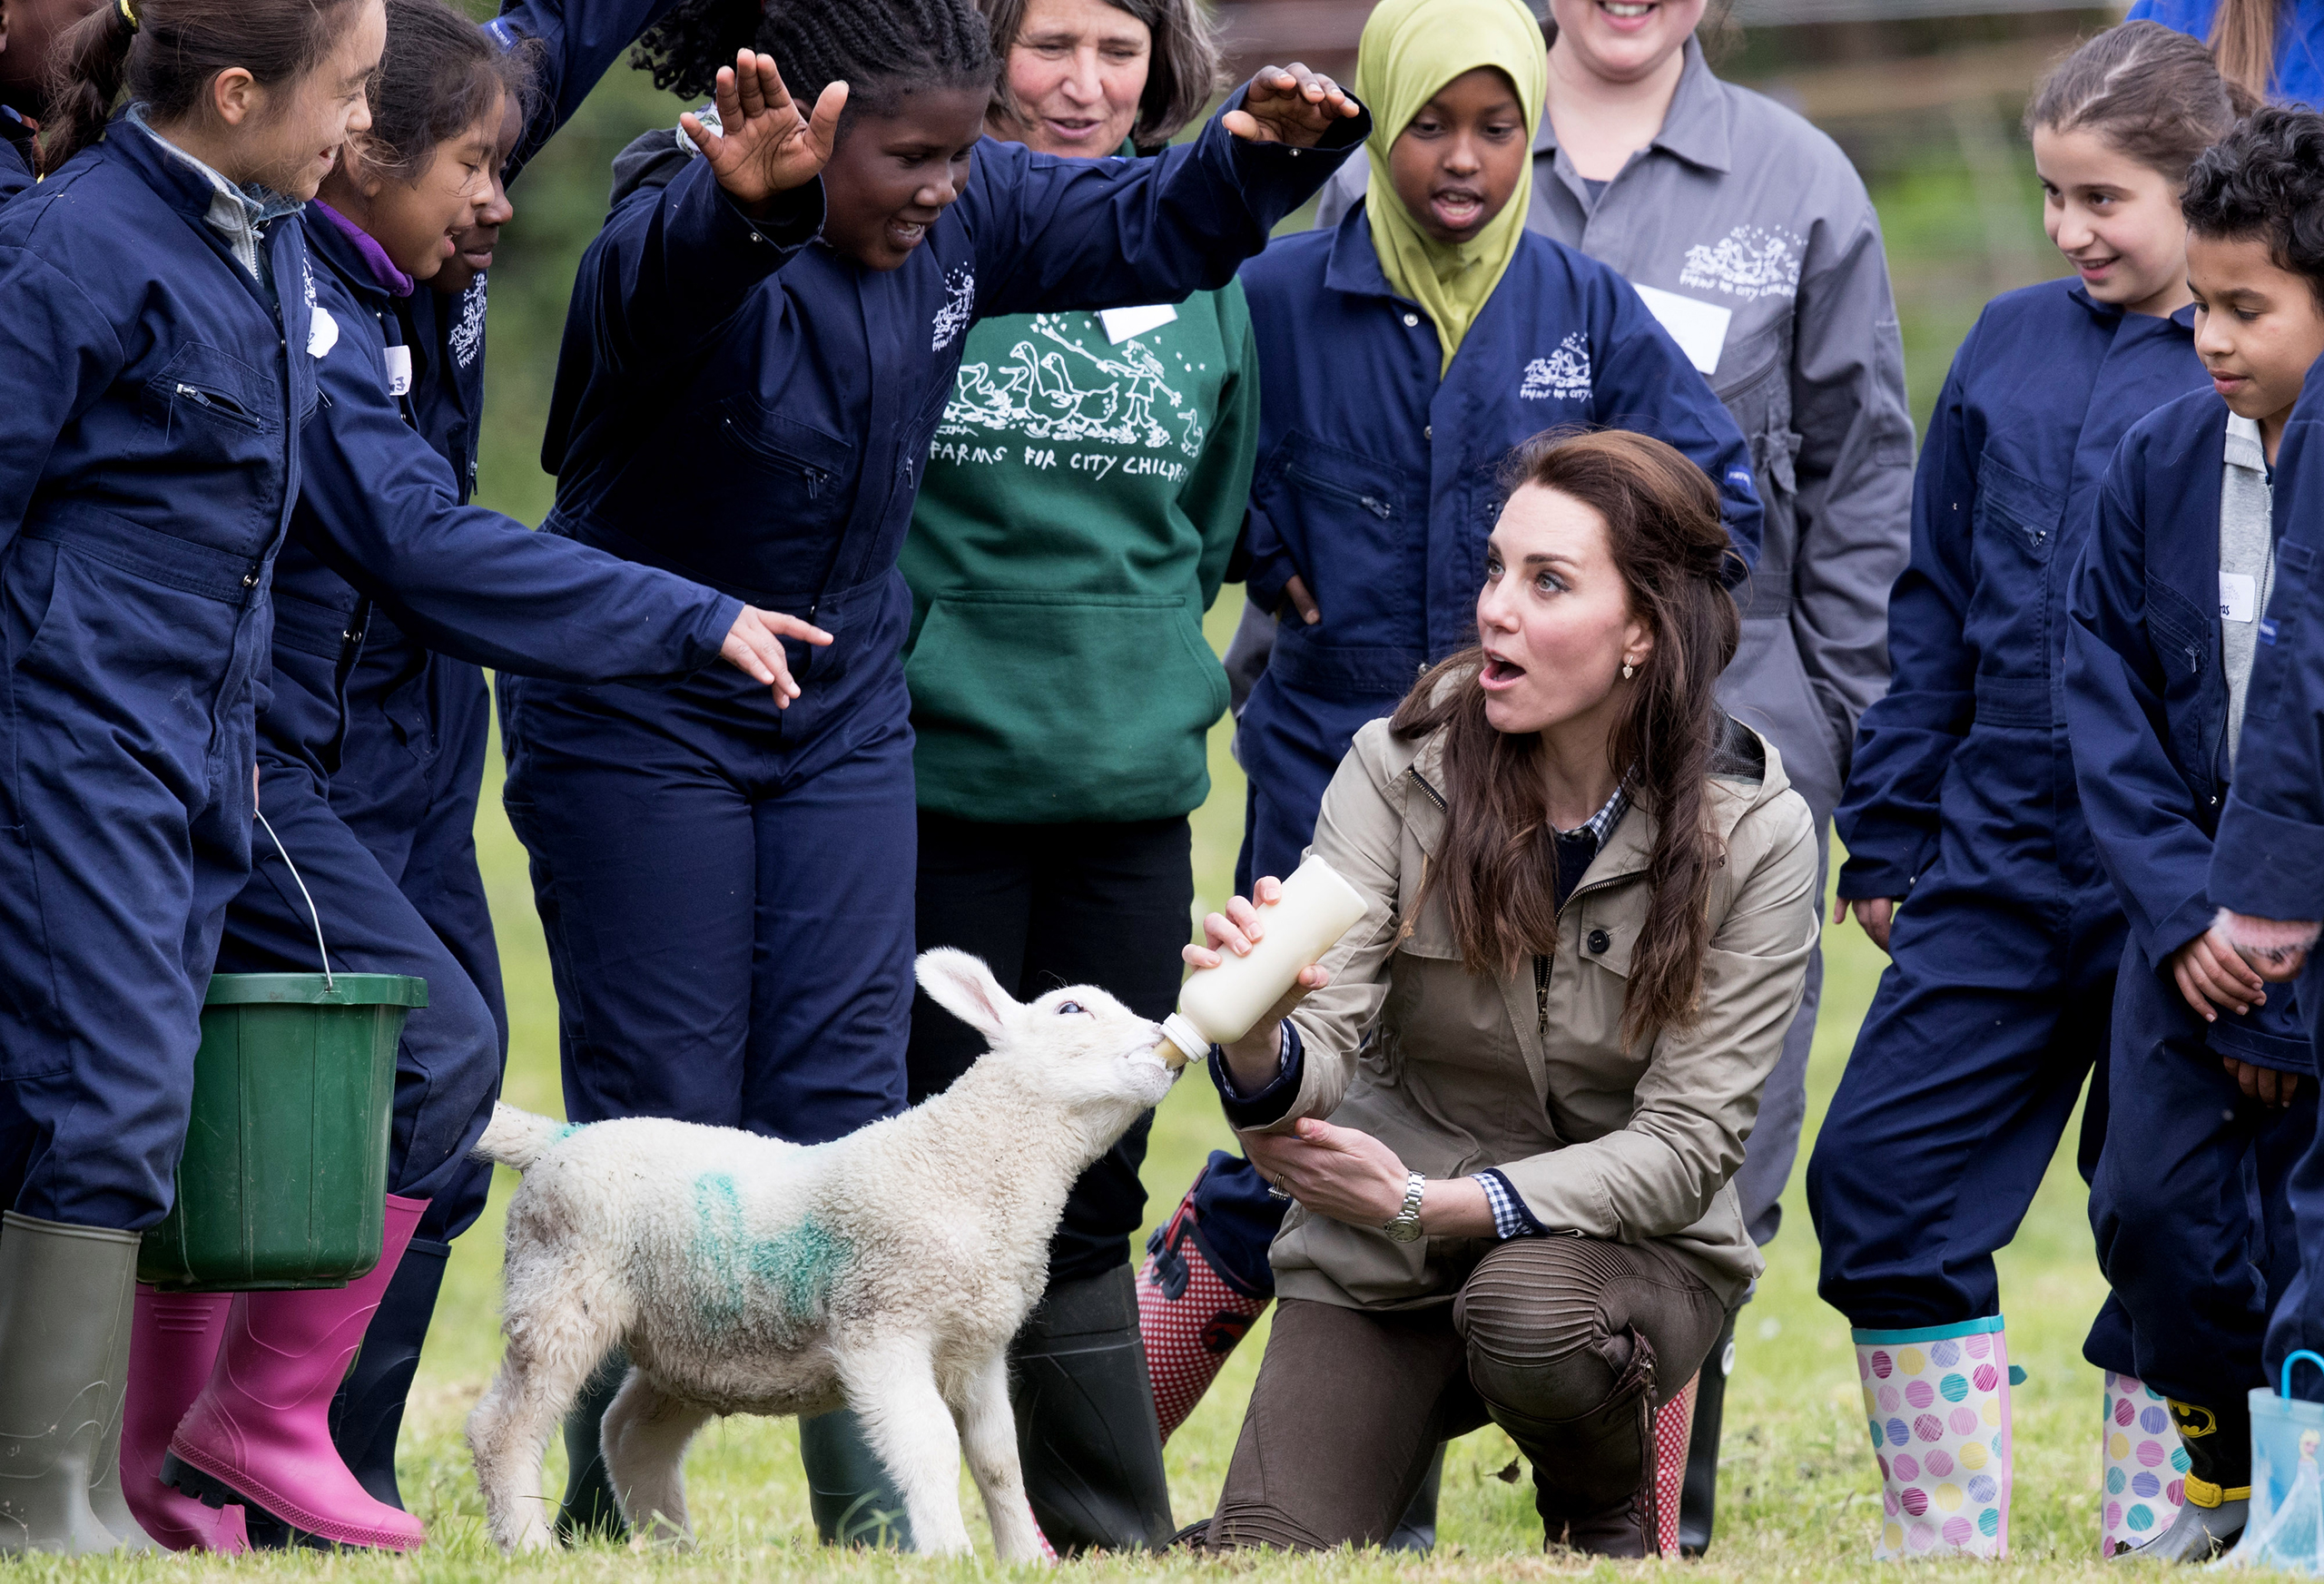 Catherine, Duchess of Cambridge feeds "Stinky" the lamb during a visit to Author Michael Morpurgo's Farms for City Children in Arlingham, Gloucestershire, on May 3, 2017. (Matt Cardy—Getty Images)